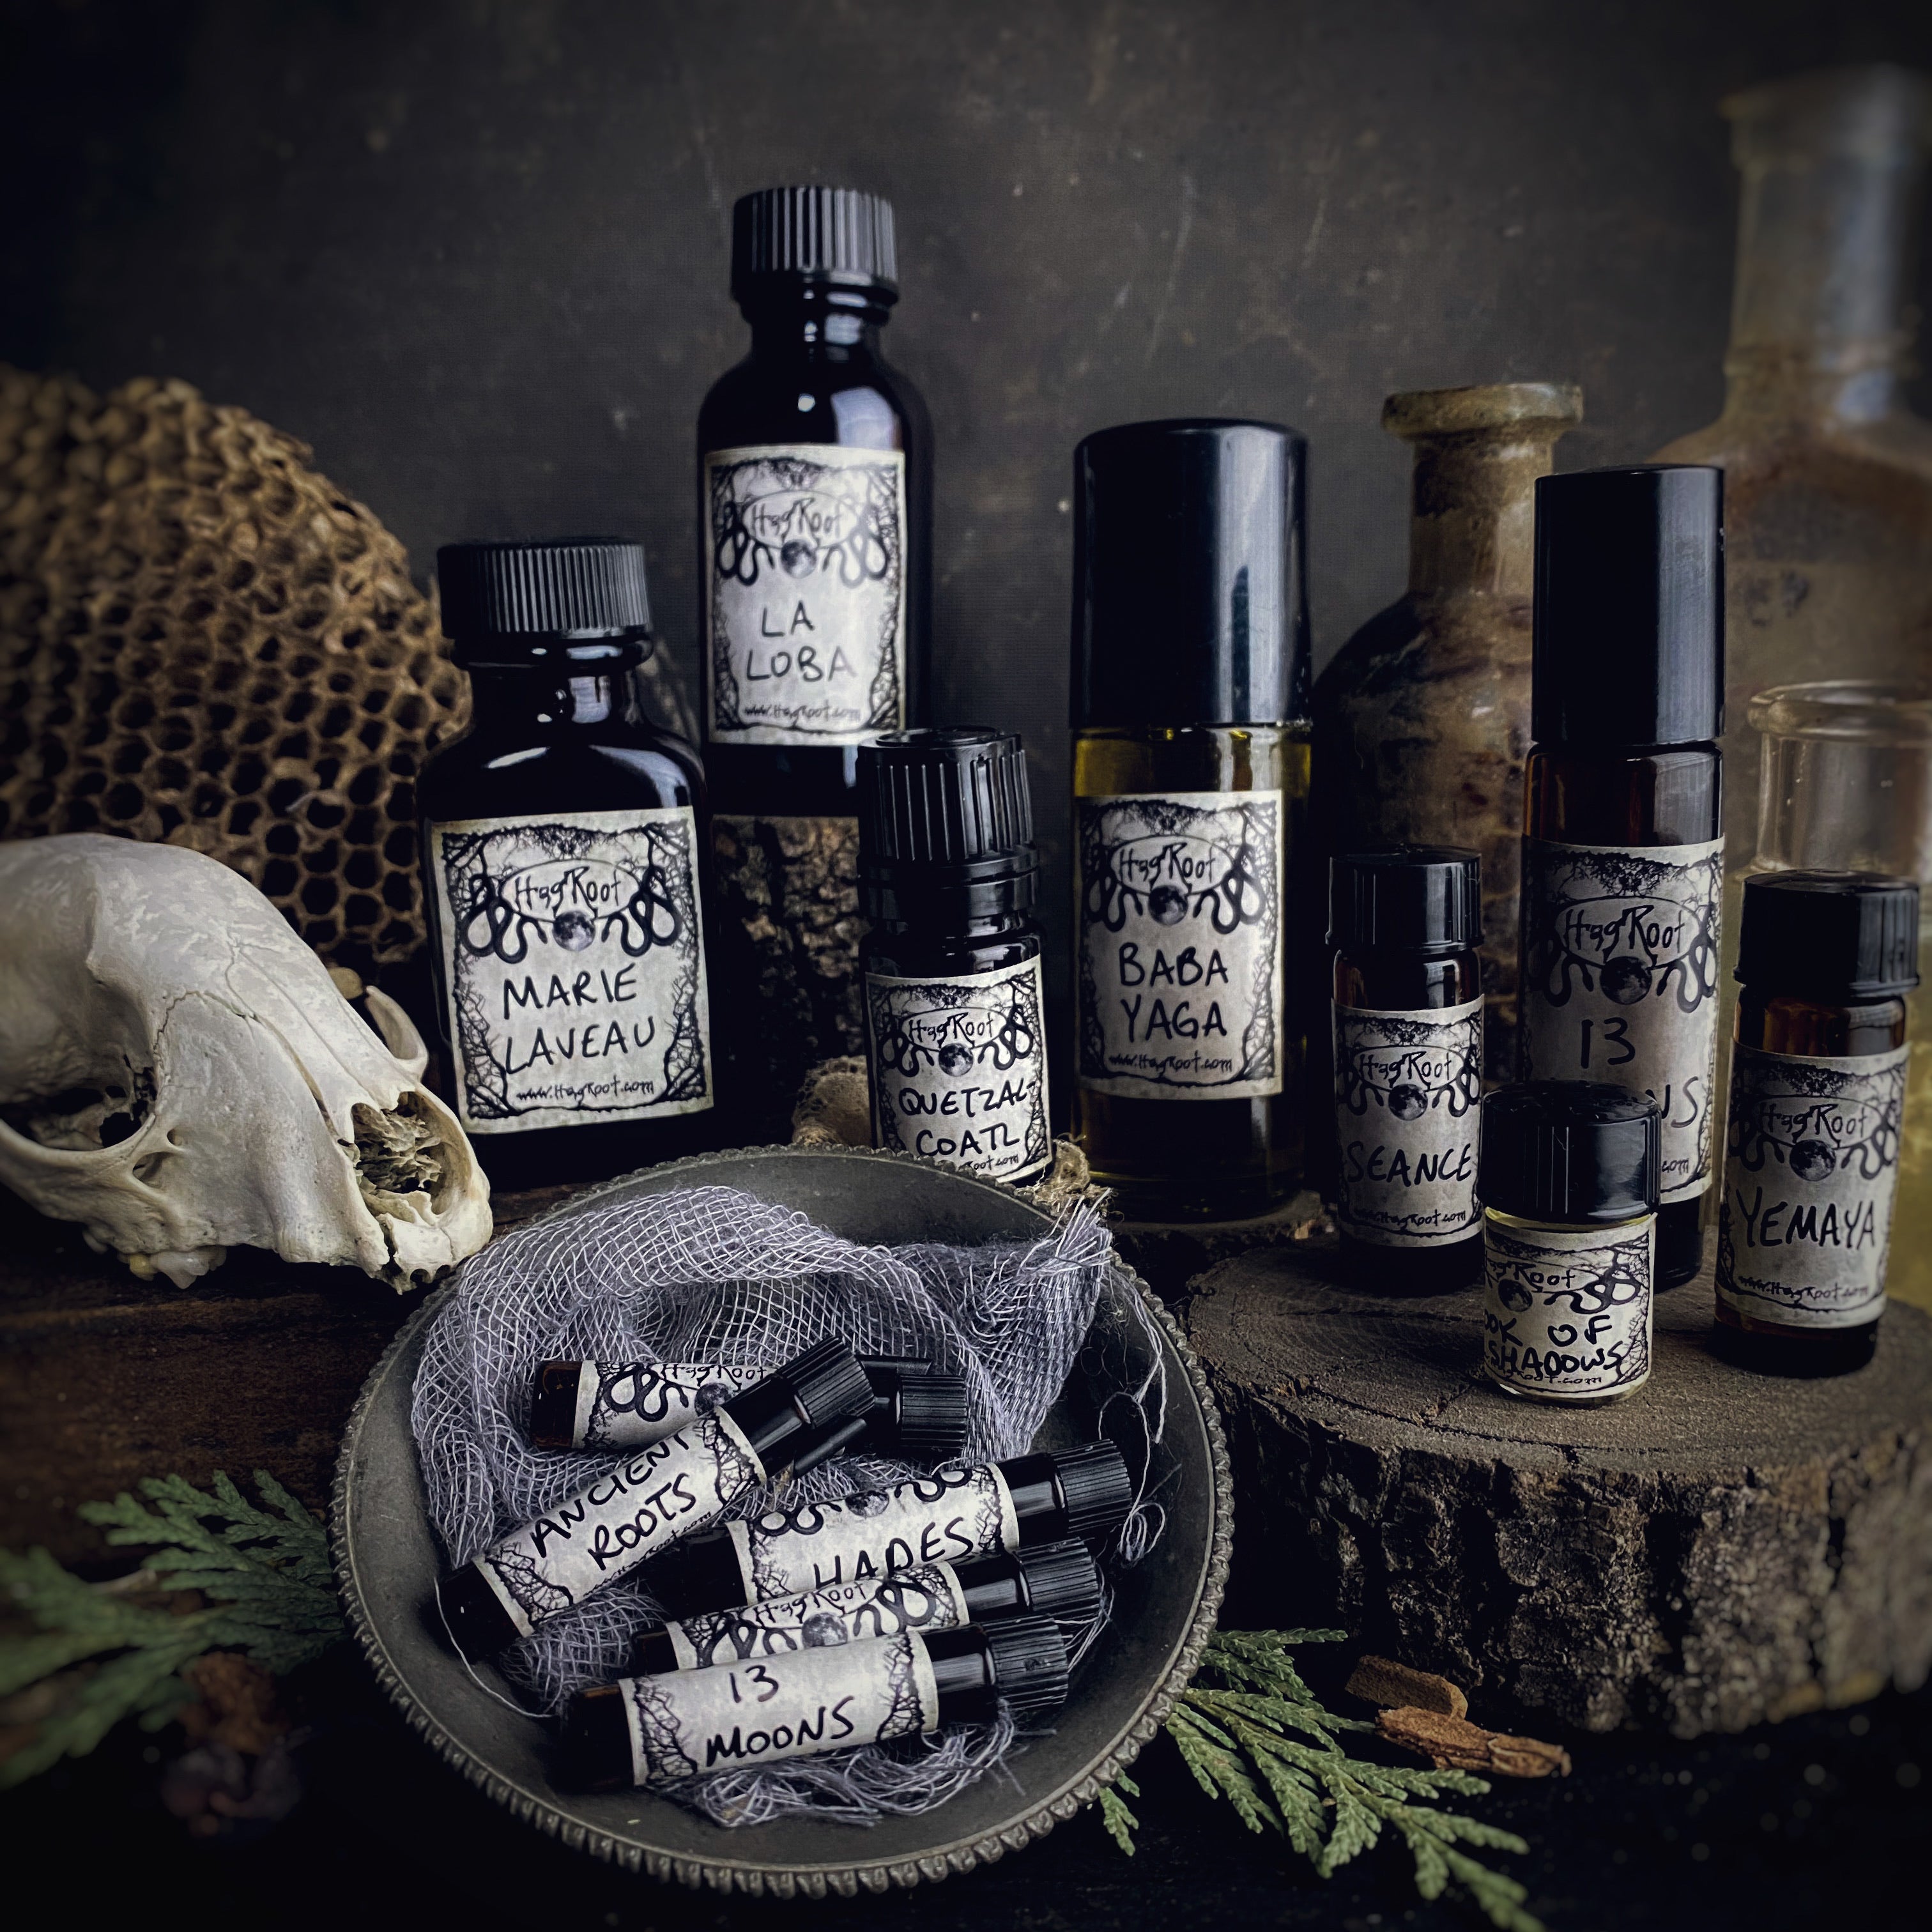 OUTSIDER-(Warm Spices, Golden Resins, Forest)-Perfume, Cologne, Anointing, Ritual Oil